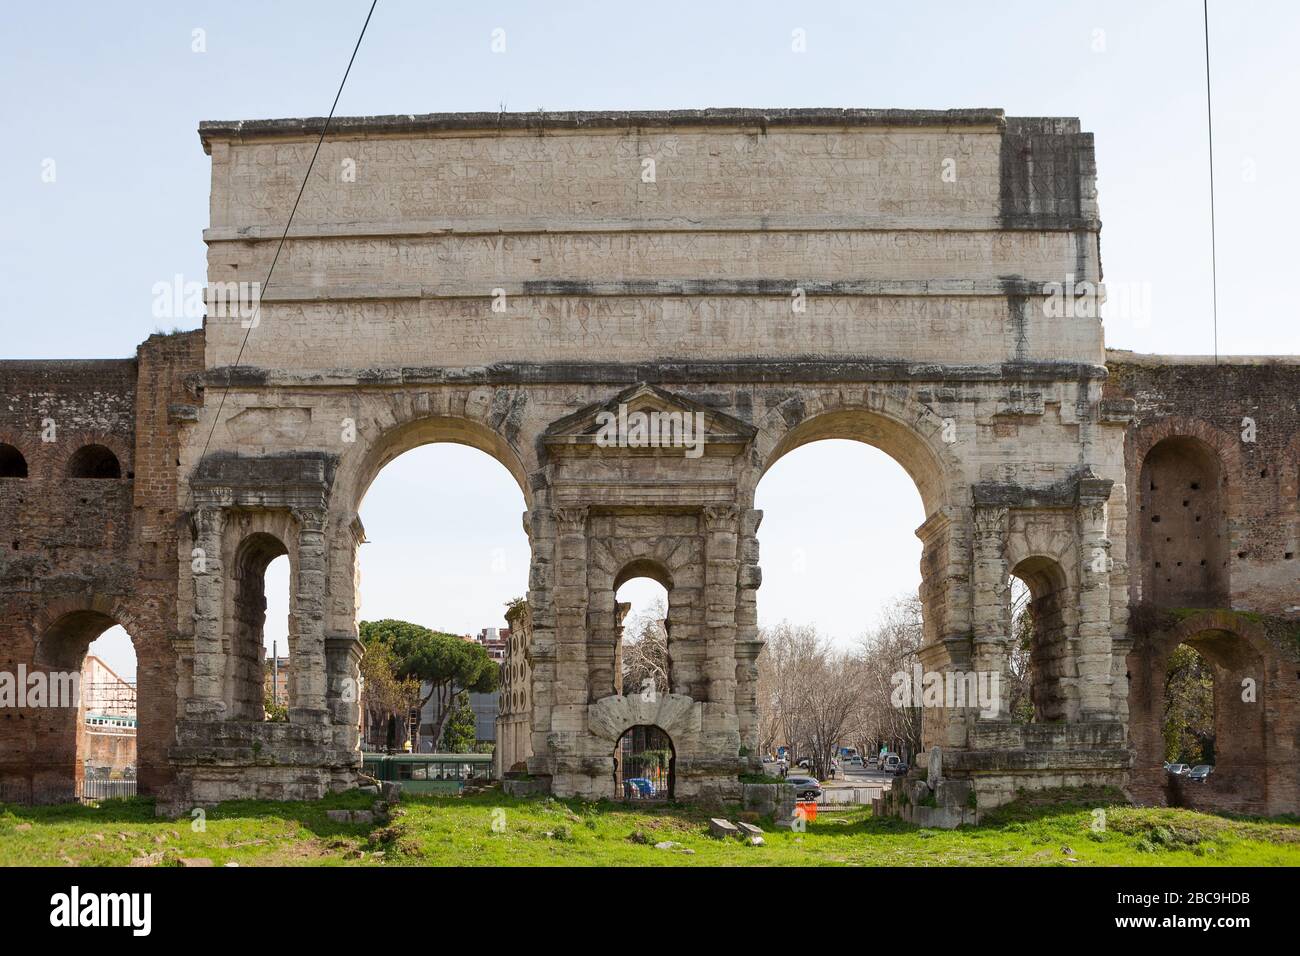 The Porta Maggiore (Larger Gate), or Porta Prenestina, is one of the  eastern gates in Aurelian Walls of Rome, Italy Stock Photo - Alamy